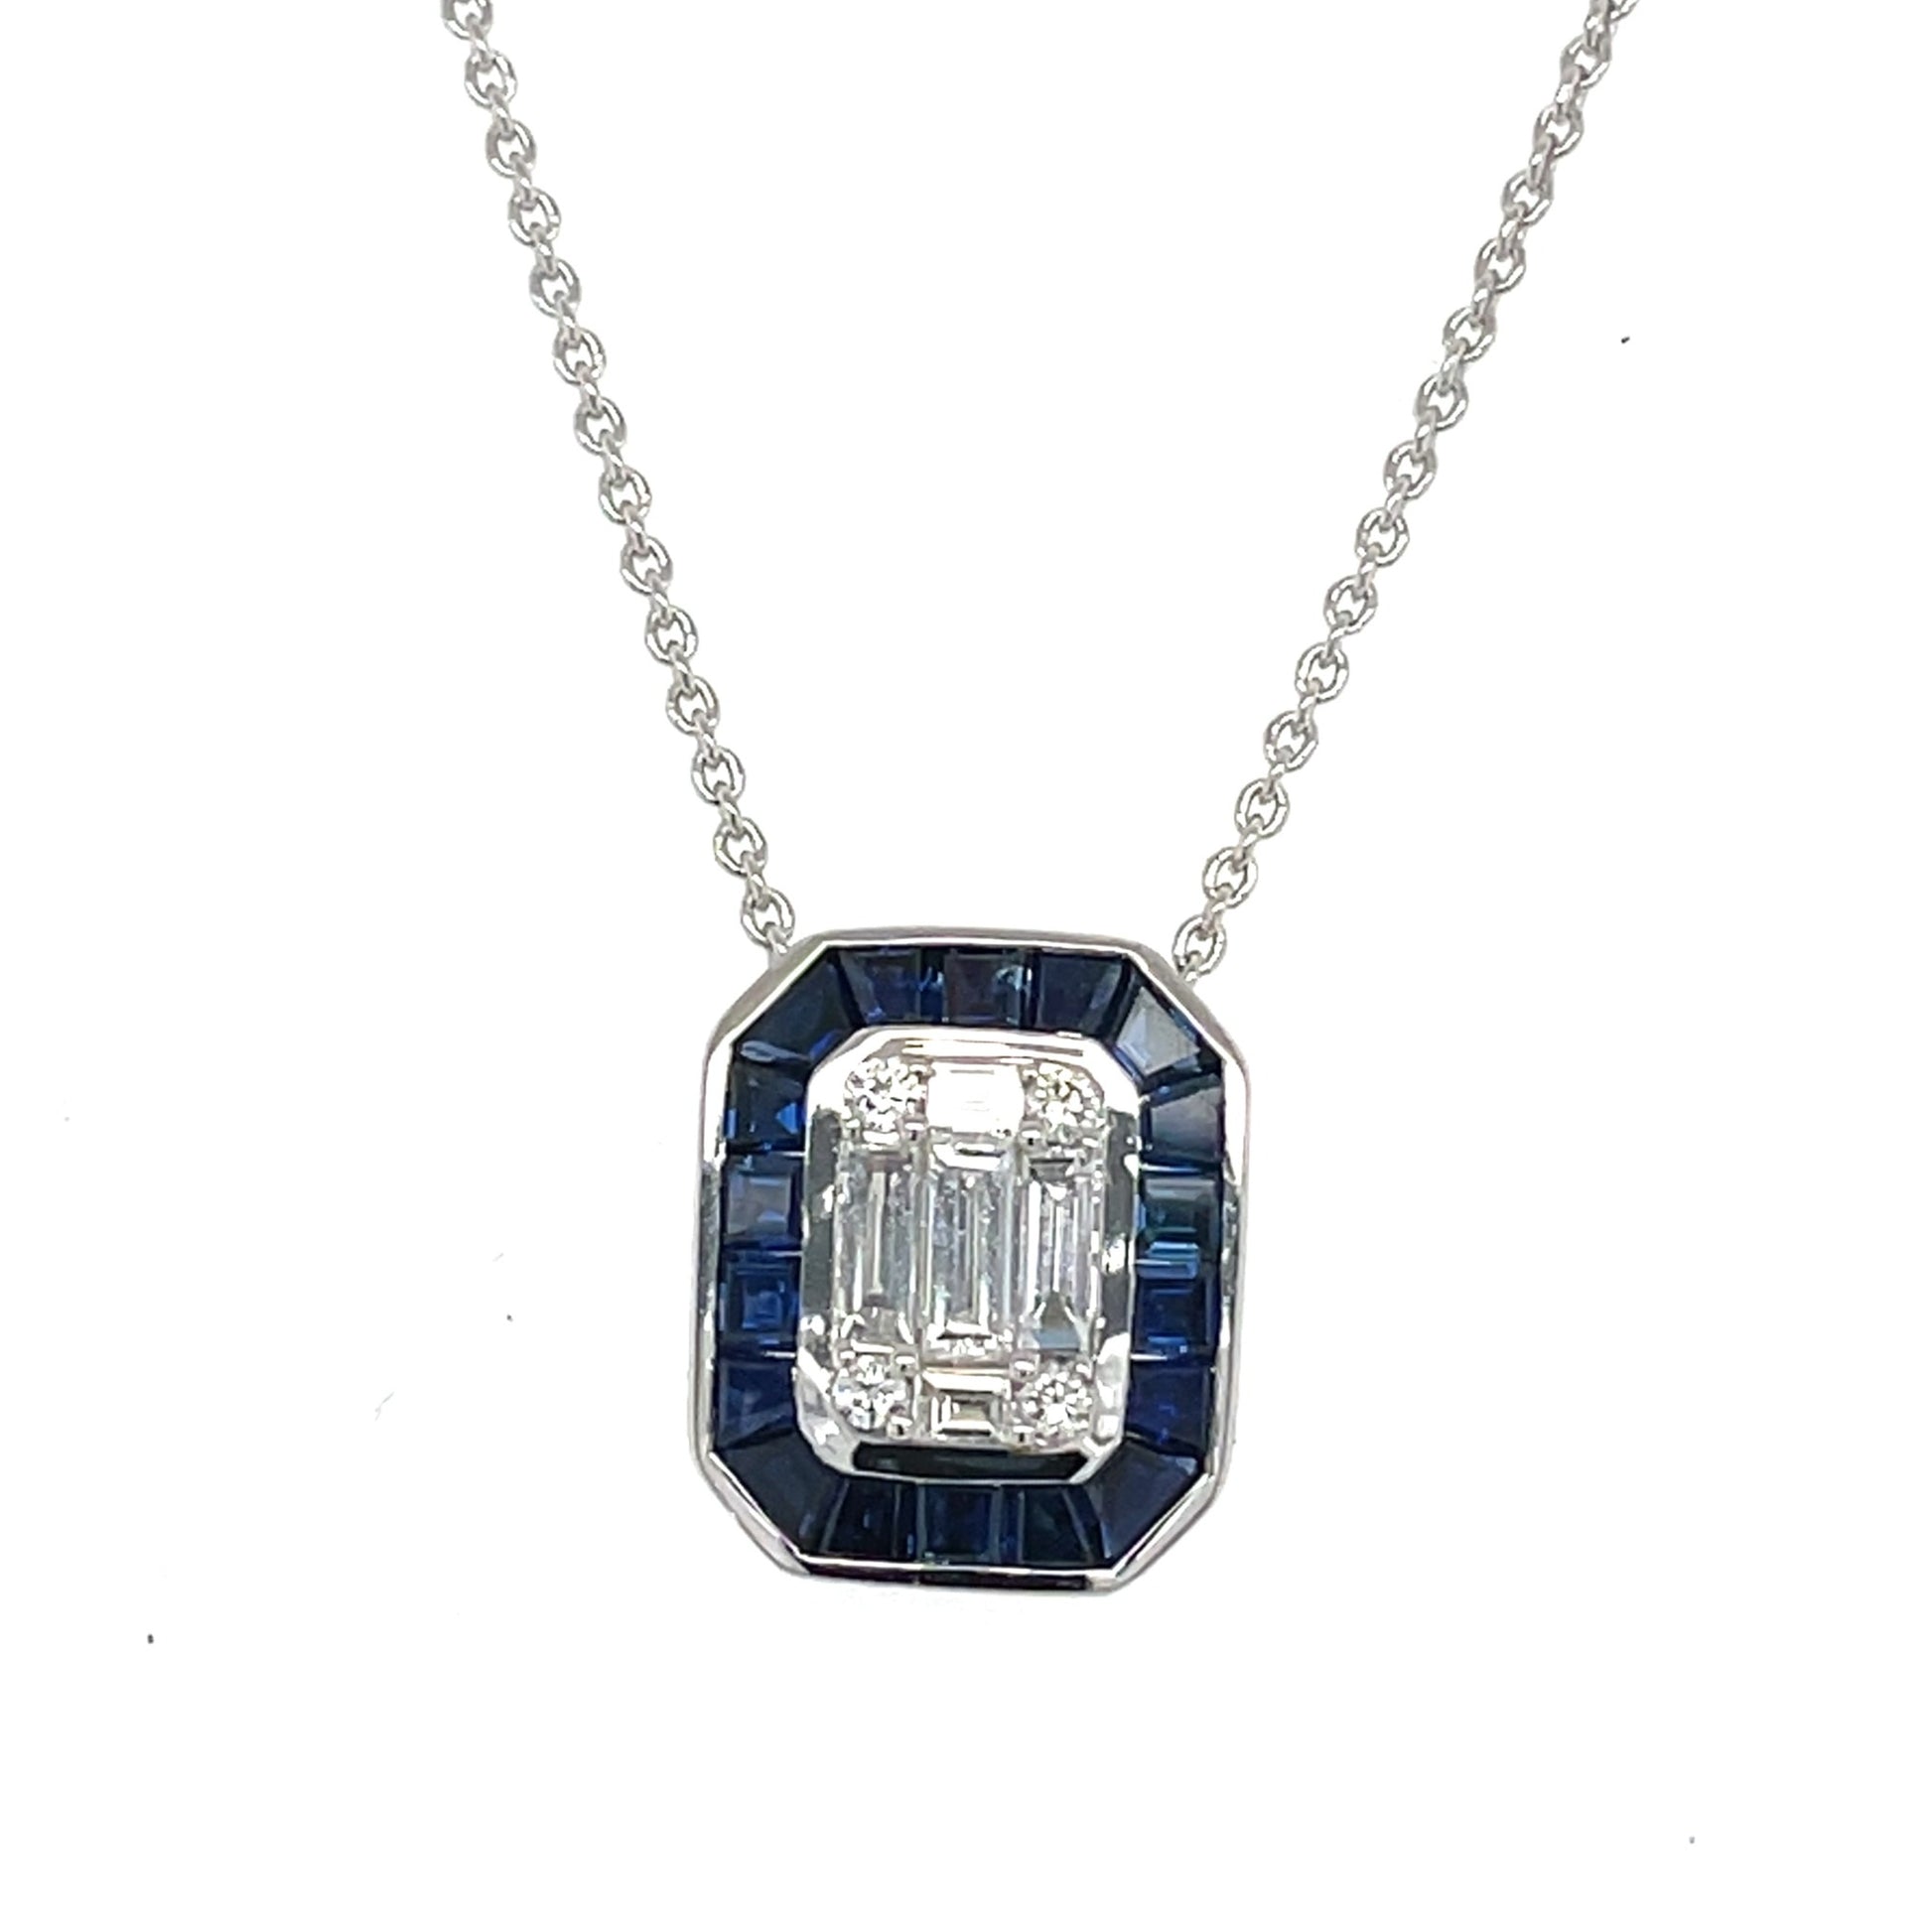 14k white gold pendant necklace with sapphires and diamonds